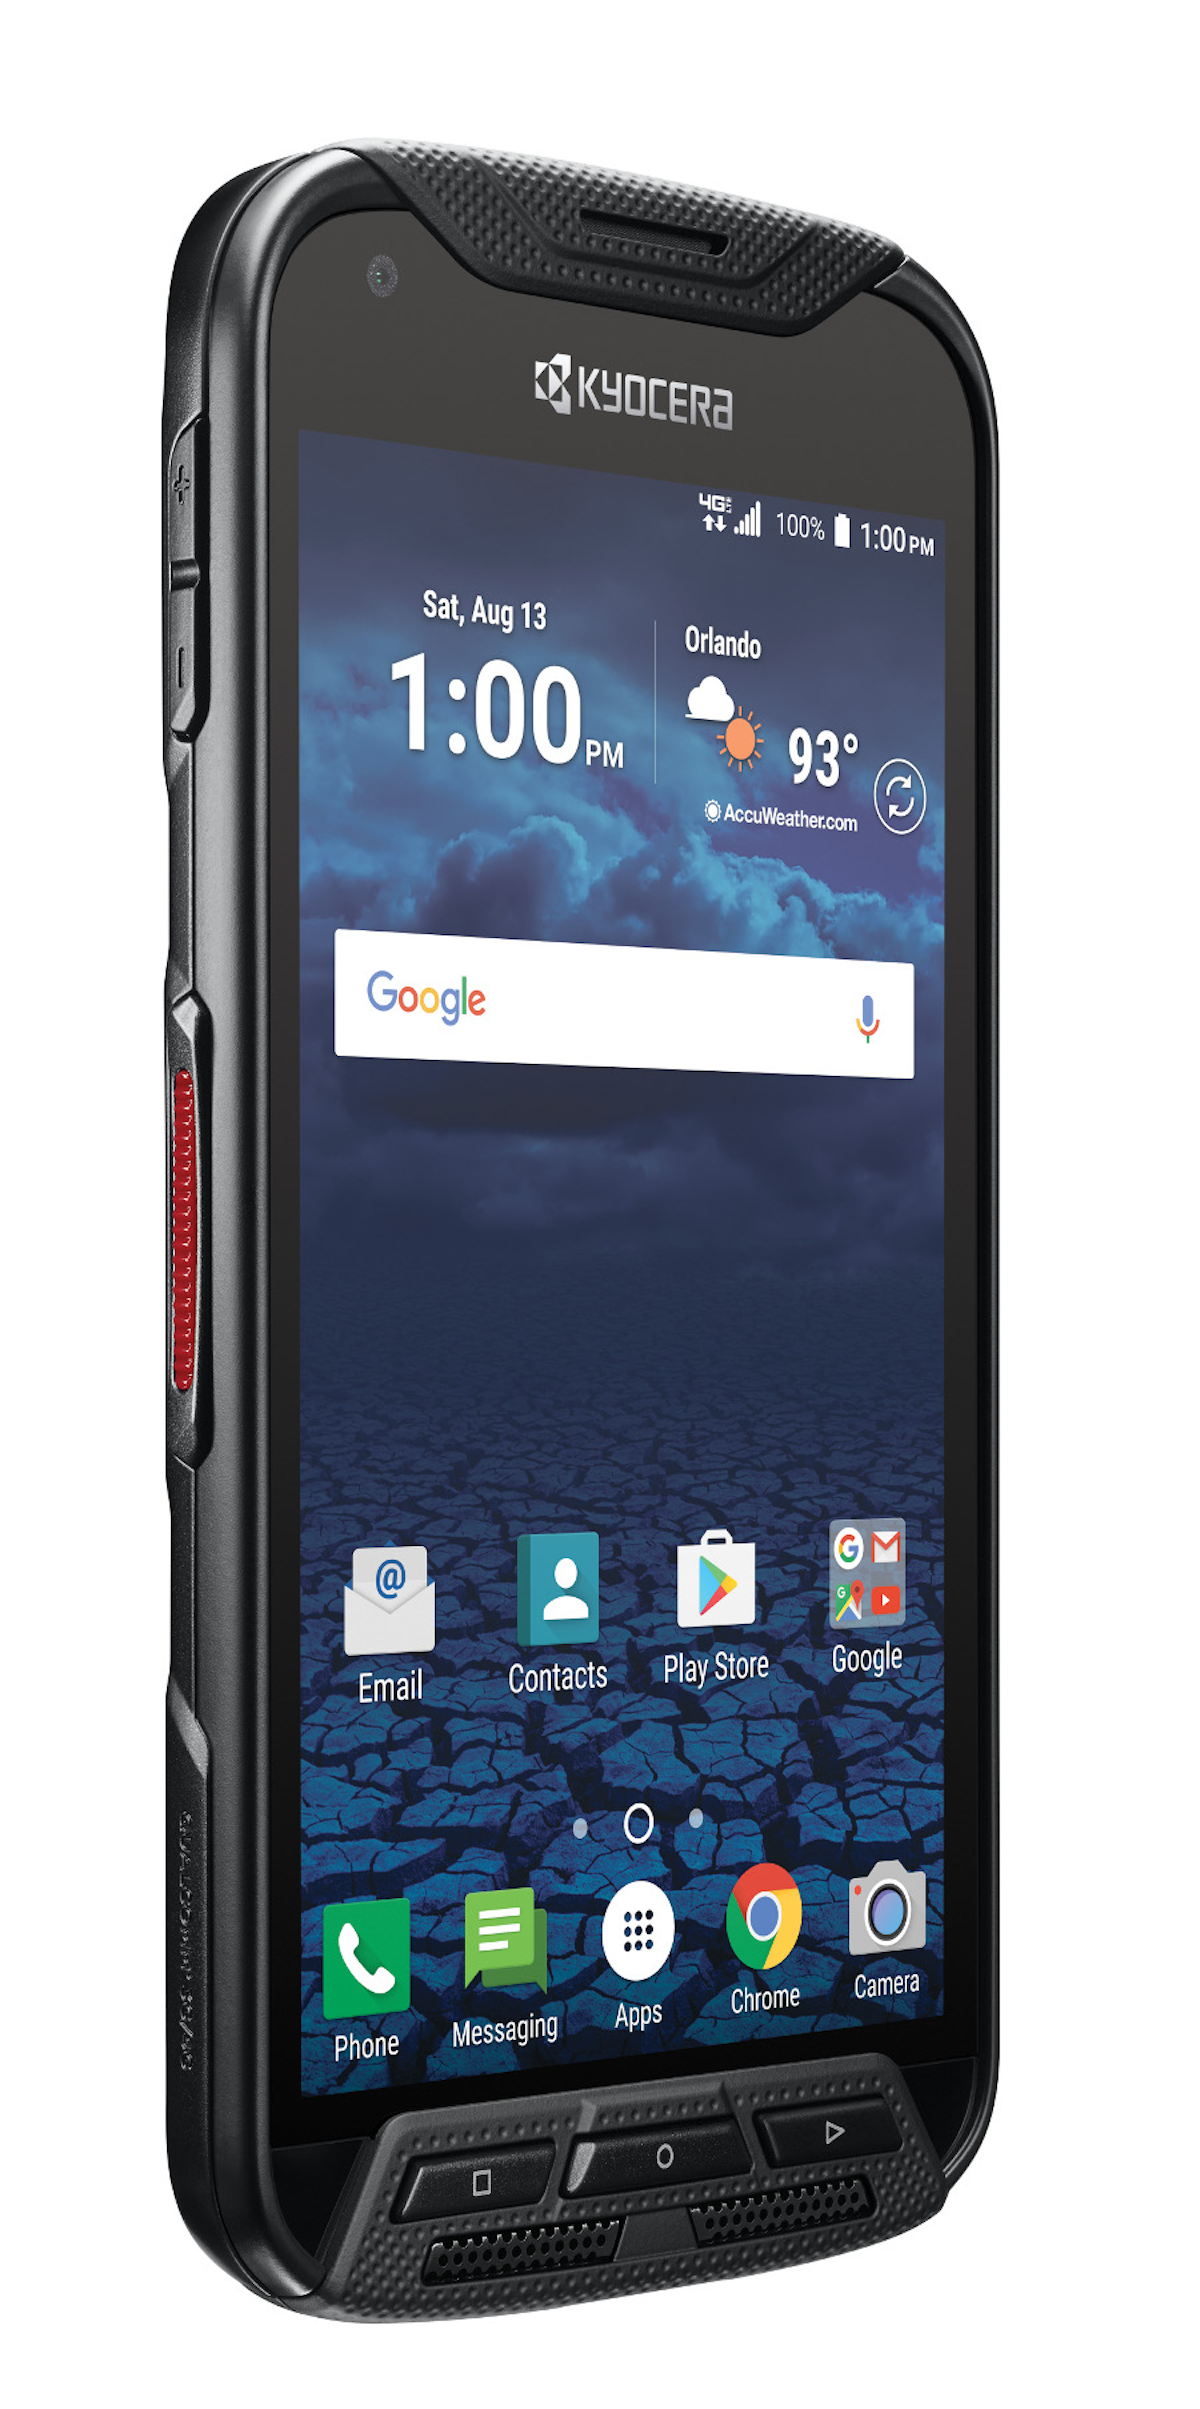 Kyocera Goes Pro with New Duraforce PRO, the First Rugged Smartphone